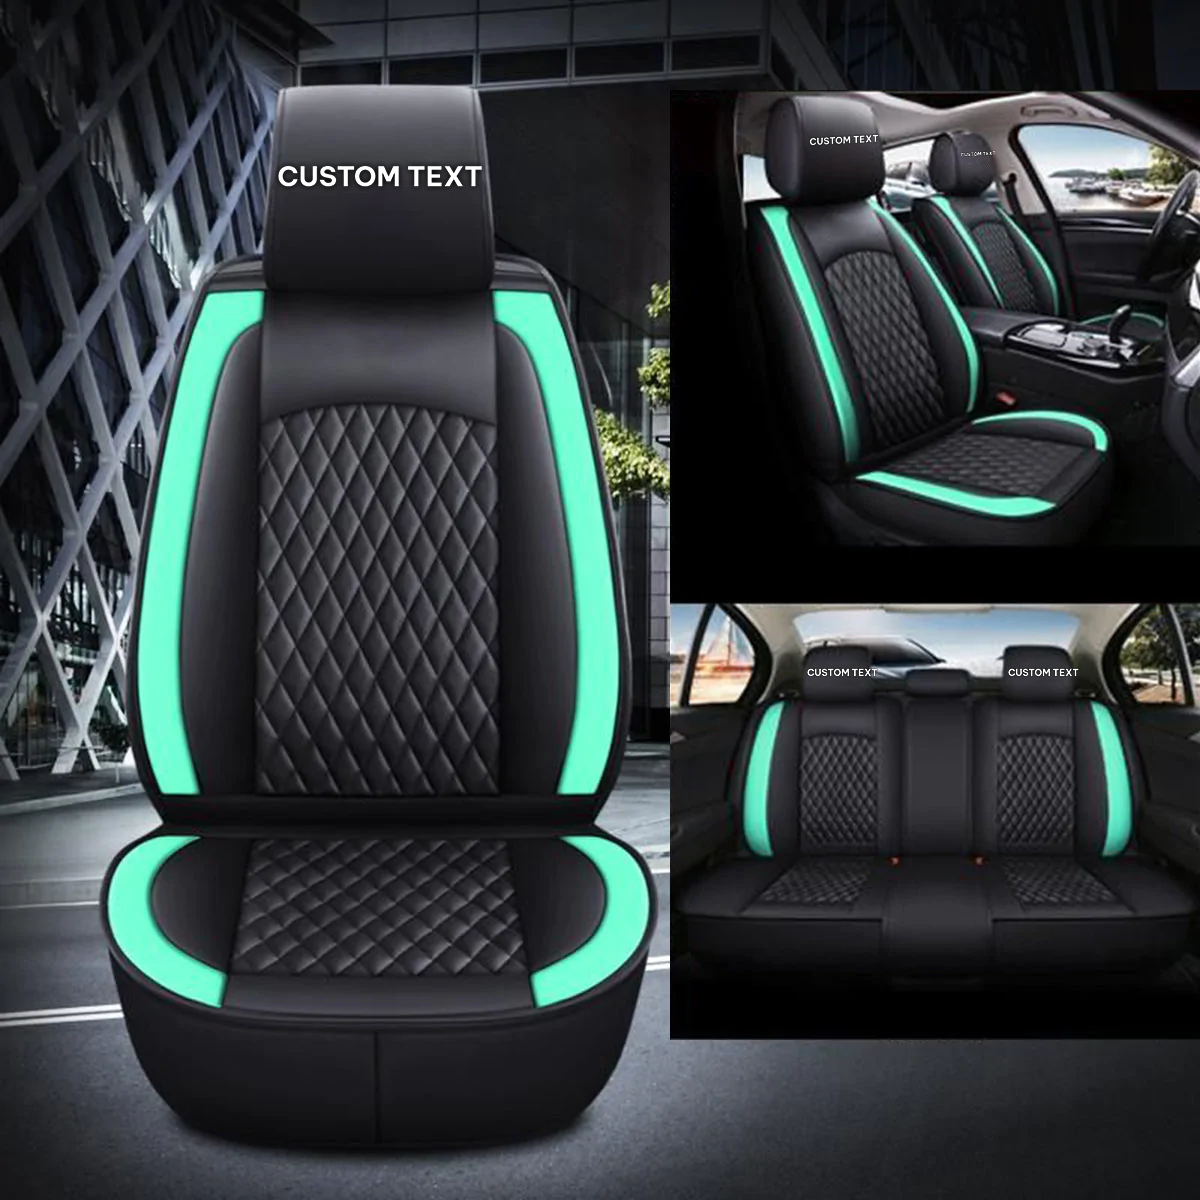 Custom Text For Seat Covers 5 Seats Full Set, Custom Fit For Your Cars, Leatherette Automotive Seat Cushion Protector Universal Fit, Vehicle Auto Interior Decor MY13988